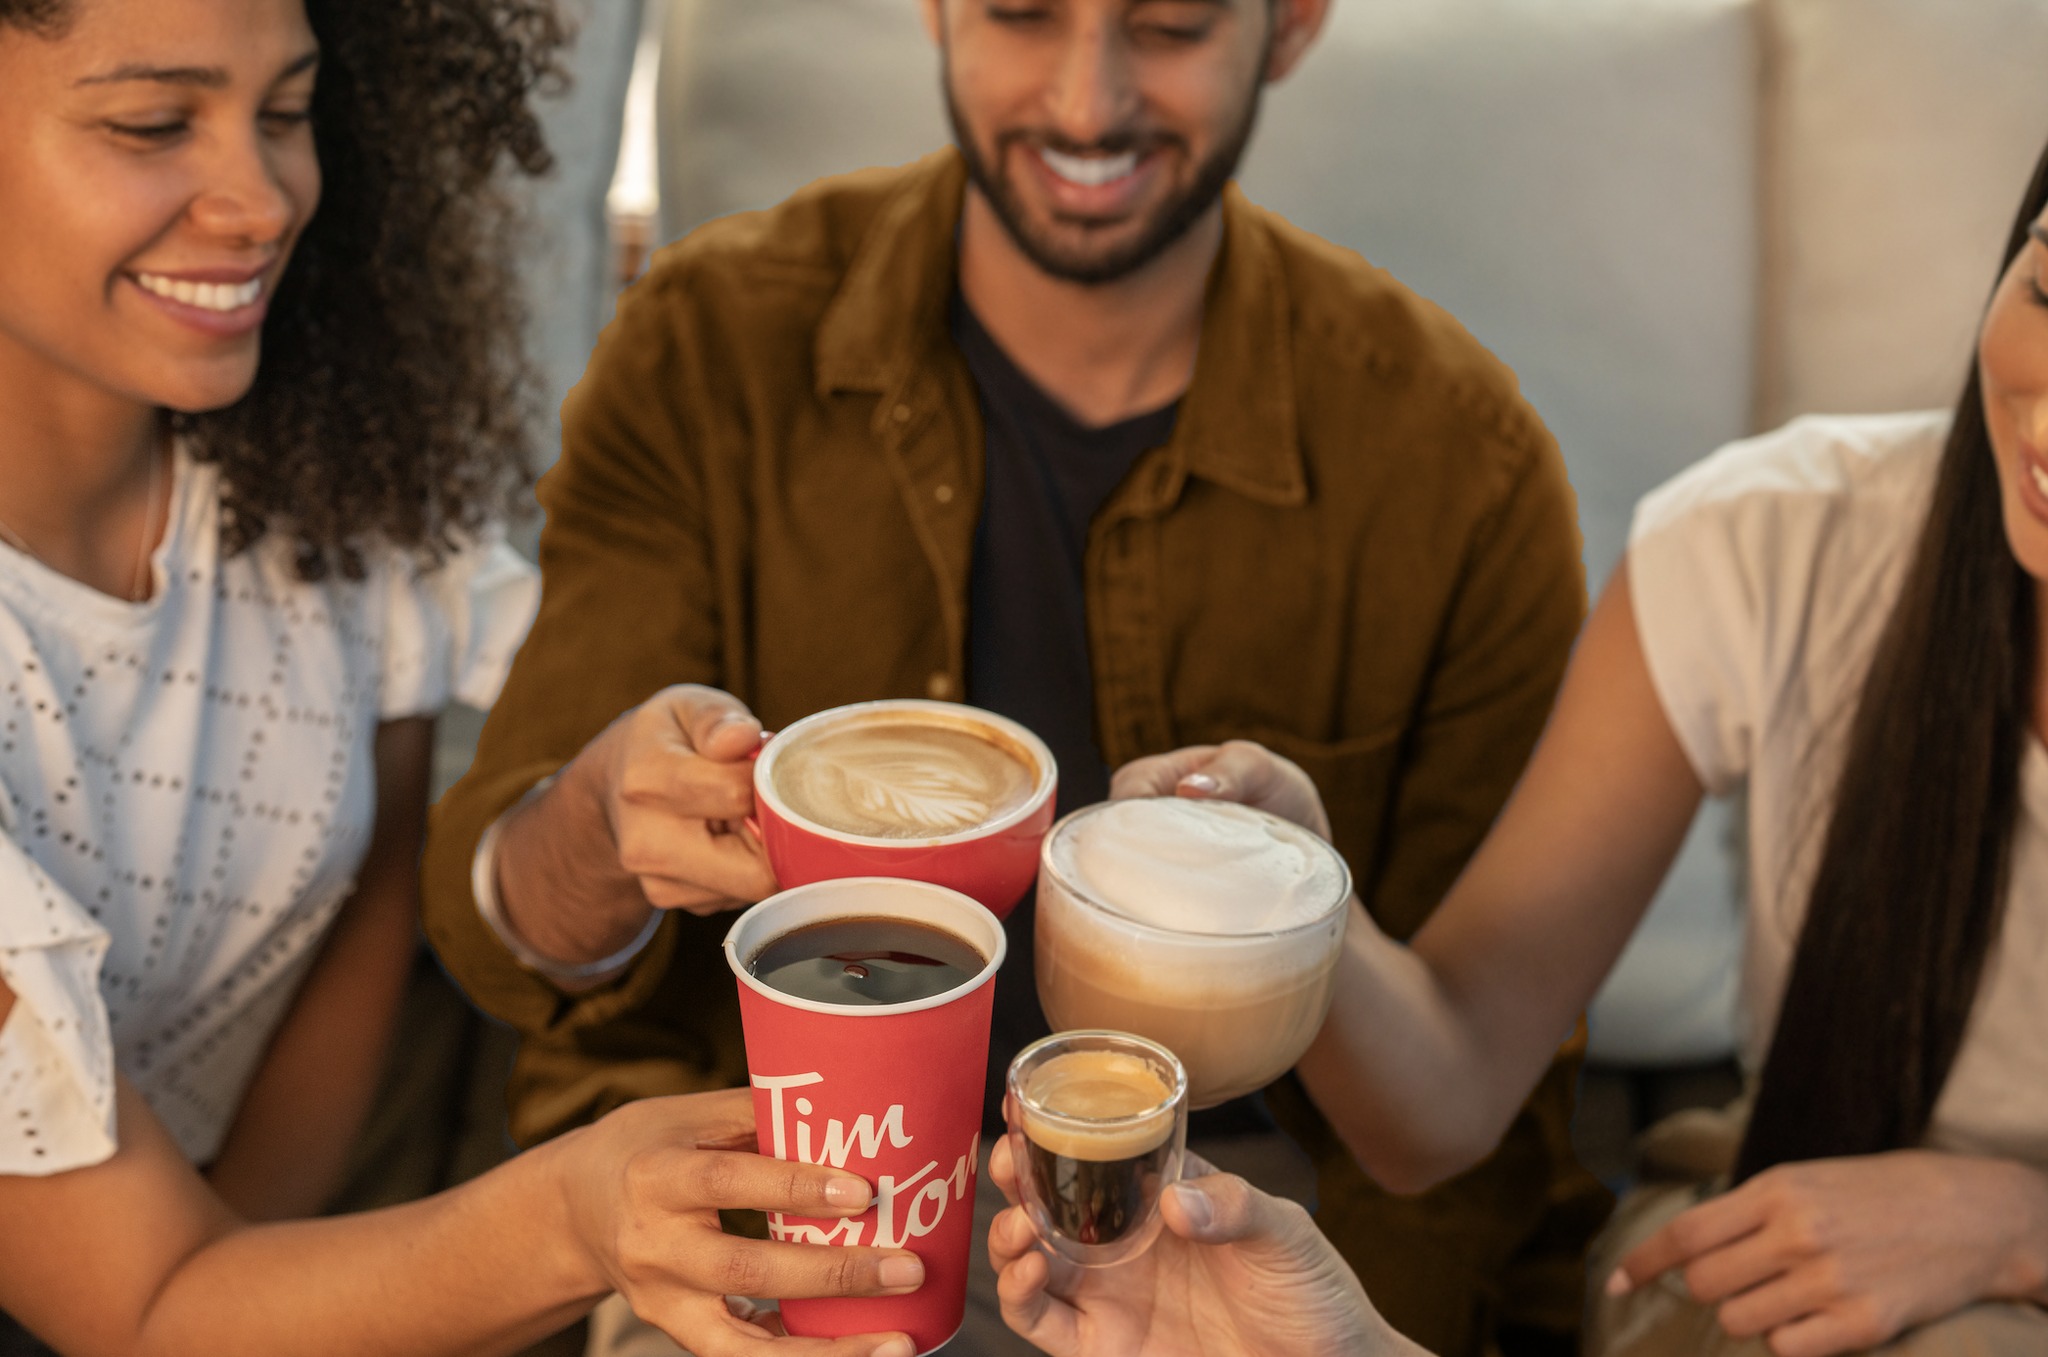 Tim Hortons Franchisee to Bring Canada's Favorite Coffee to DFW After Houston